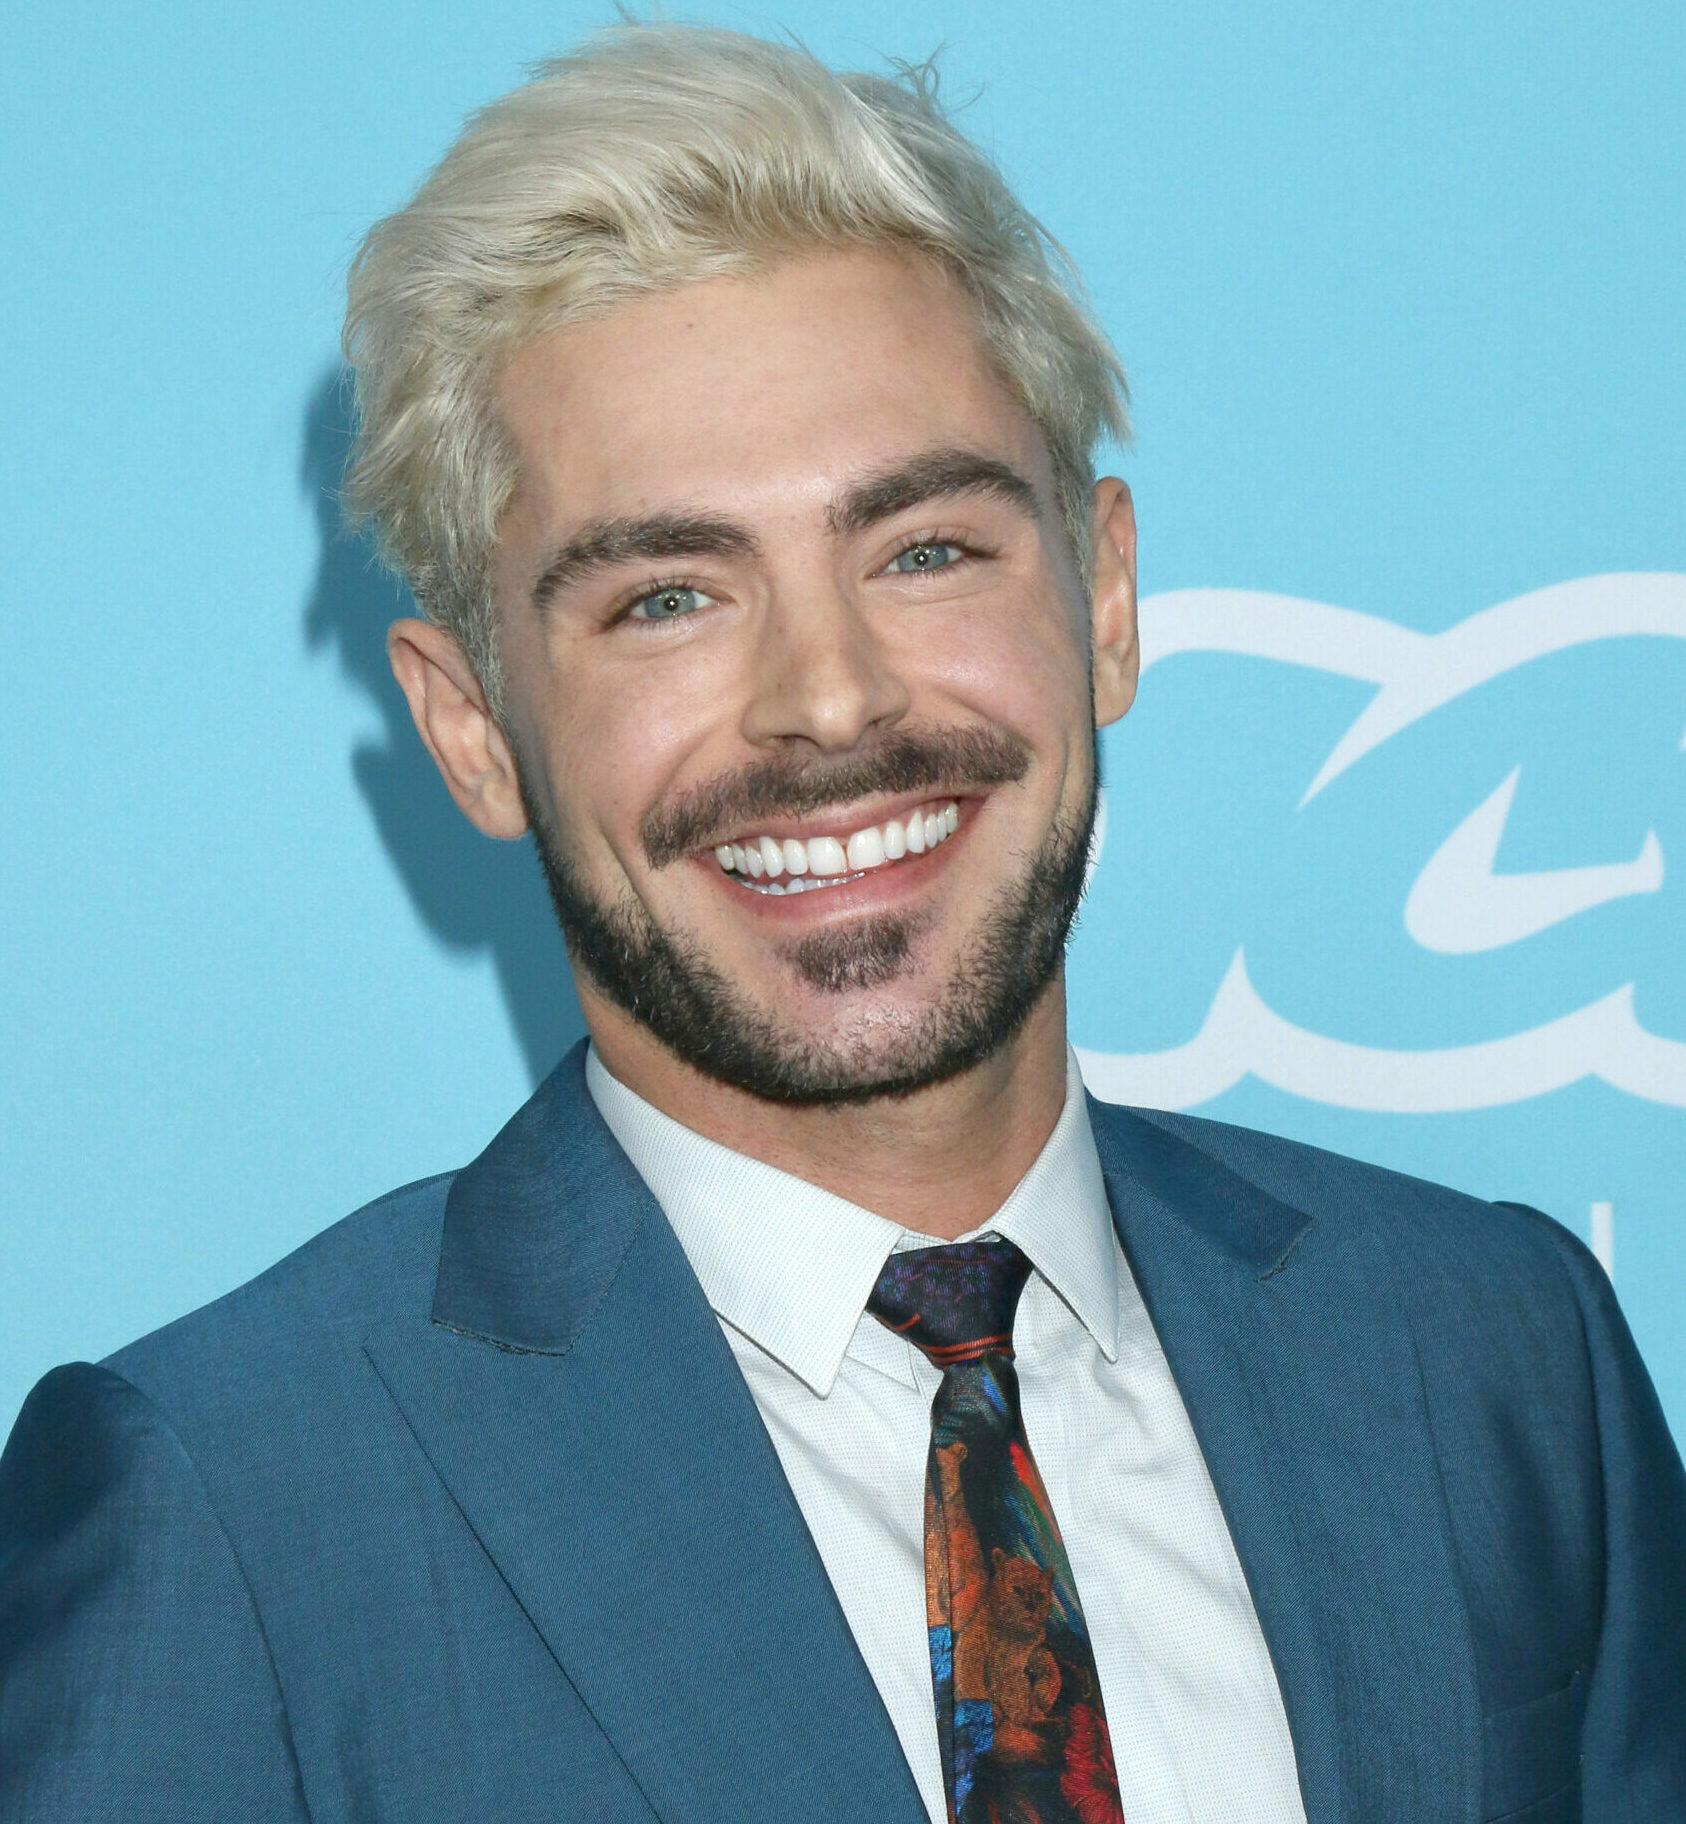 Zac Efron at "The Beach Bum" Premiere at the ArcLight Hollywood on March 28, 2019 in Los Angeles, CA